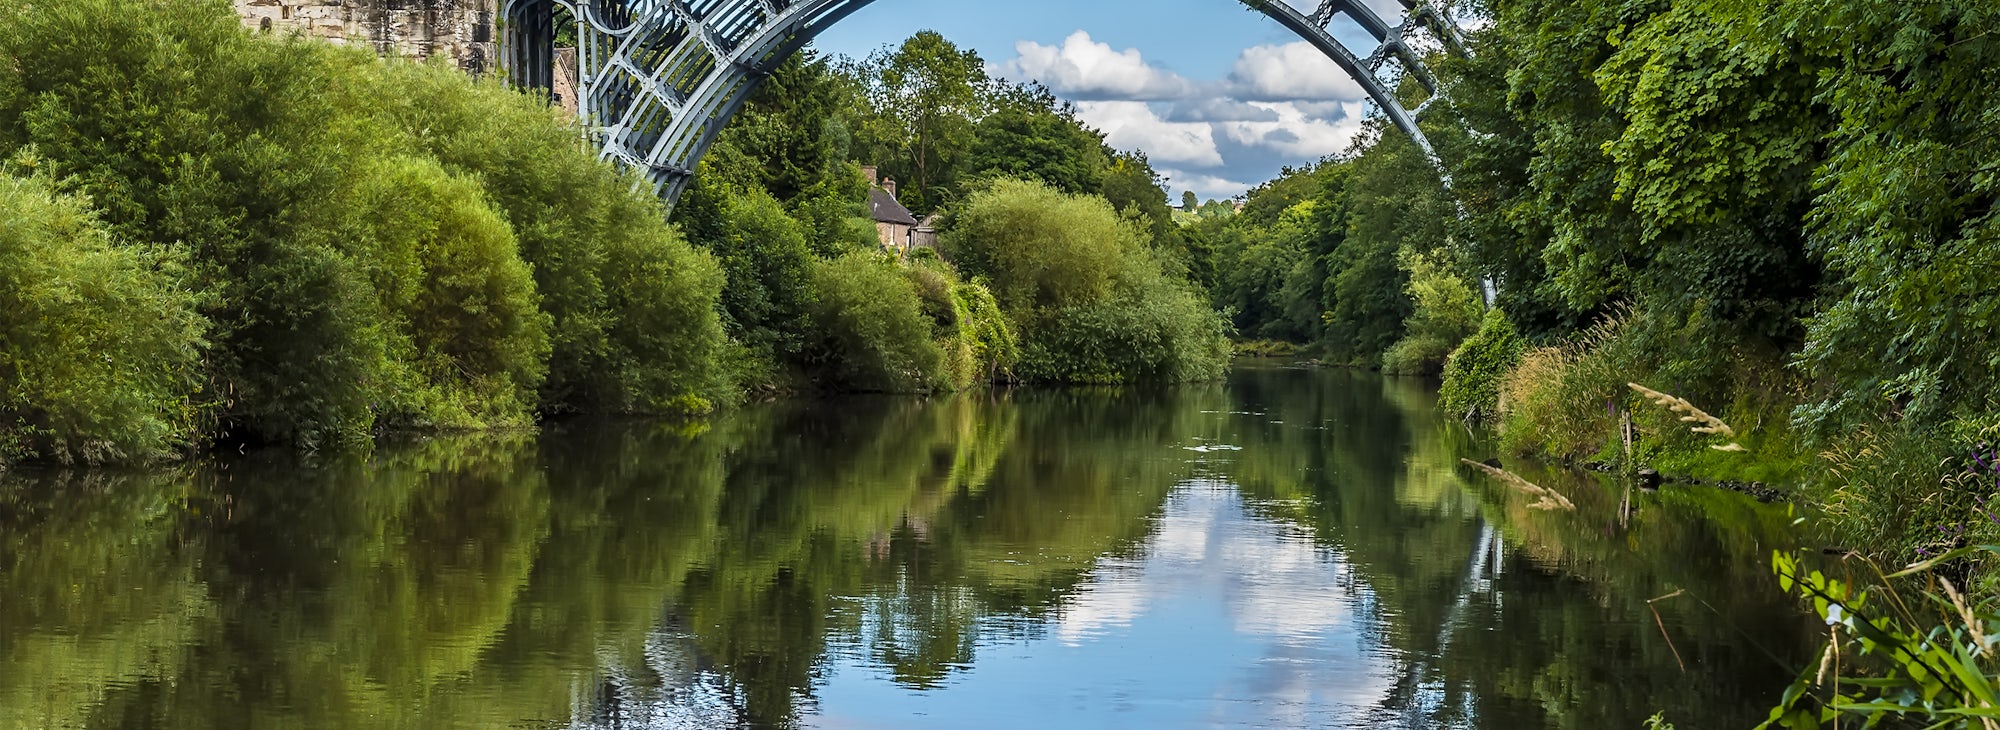 A view of the bridge over the River Severn at Ironbridge, Shropshire, UK